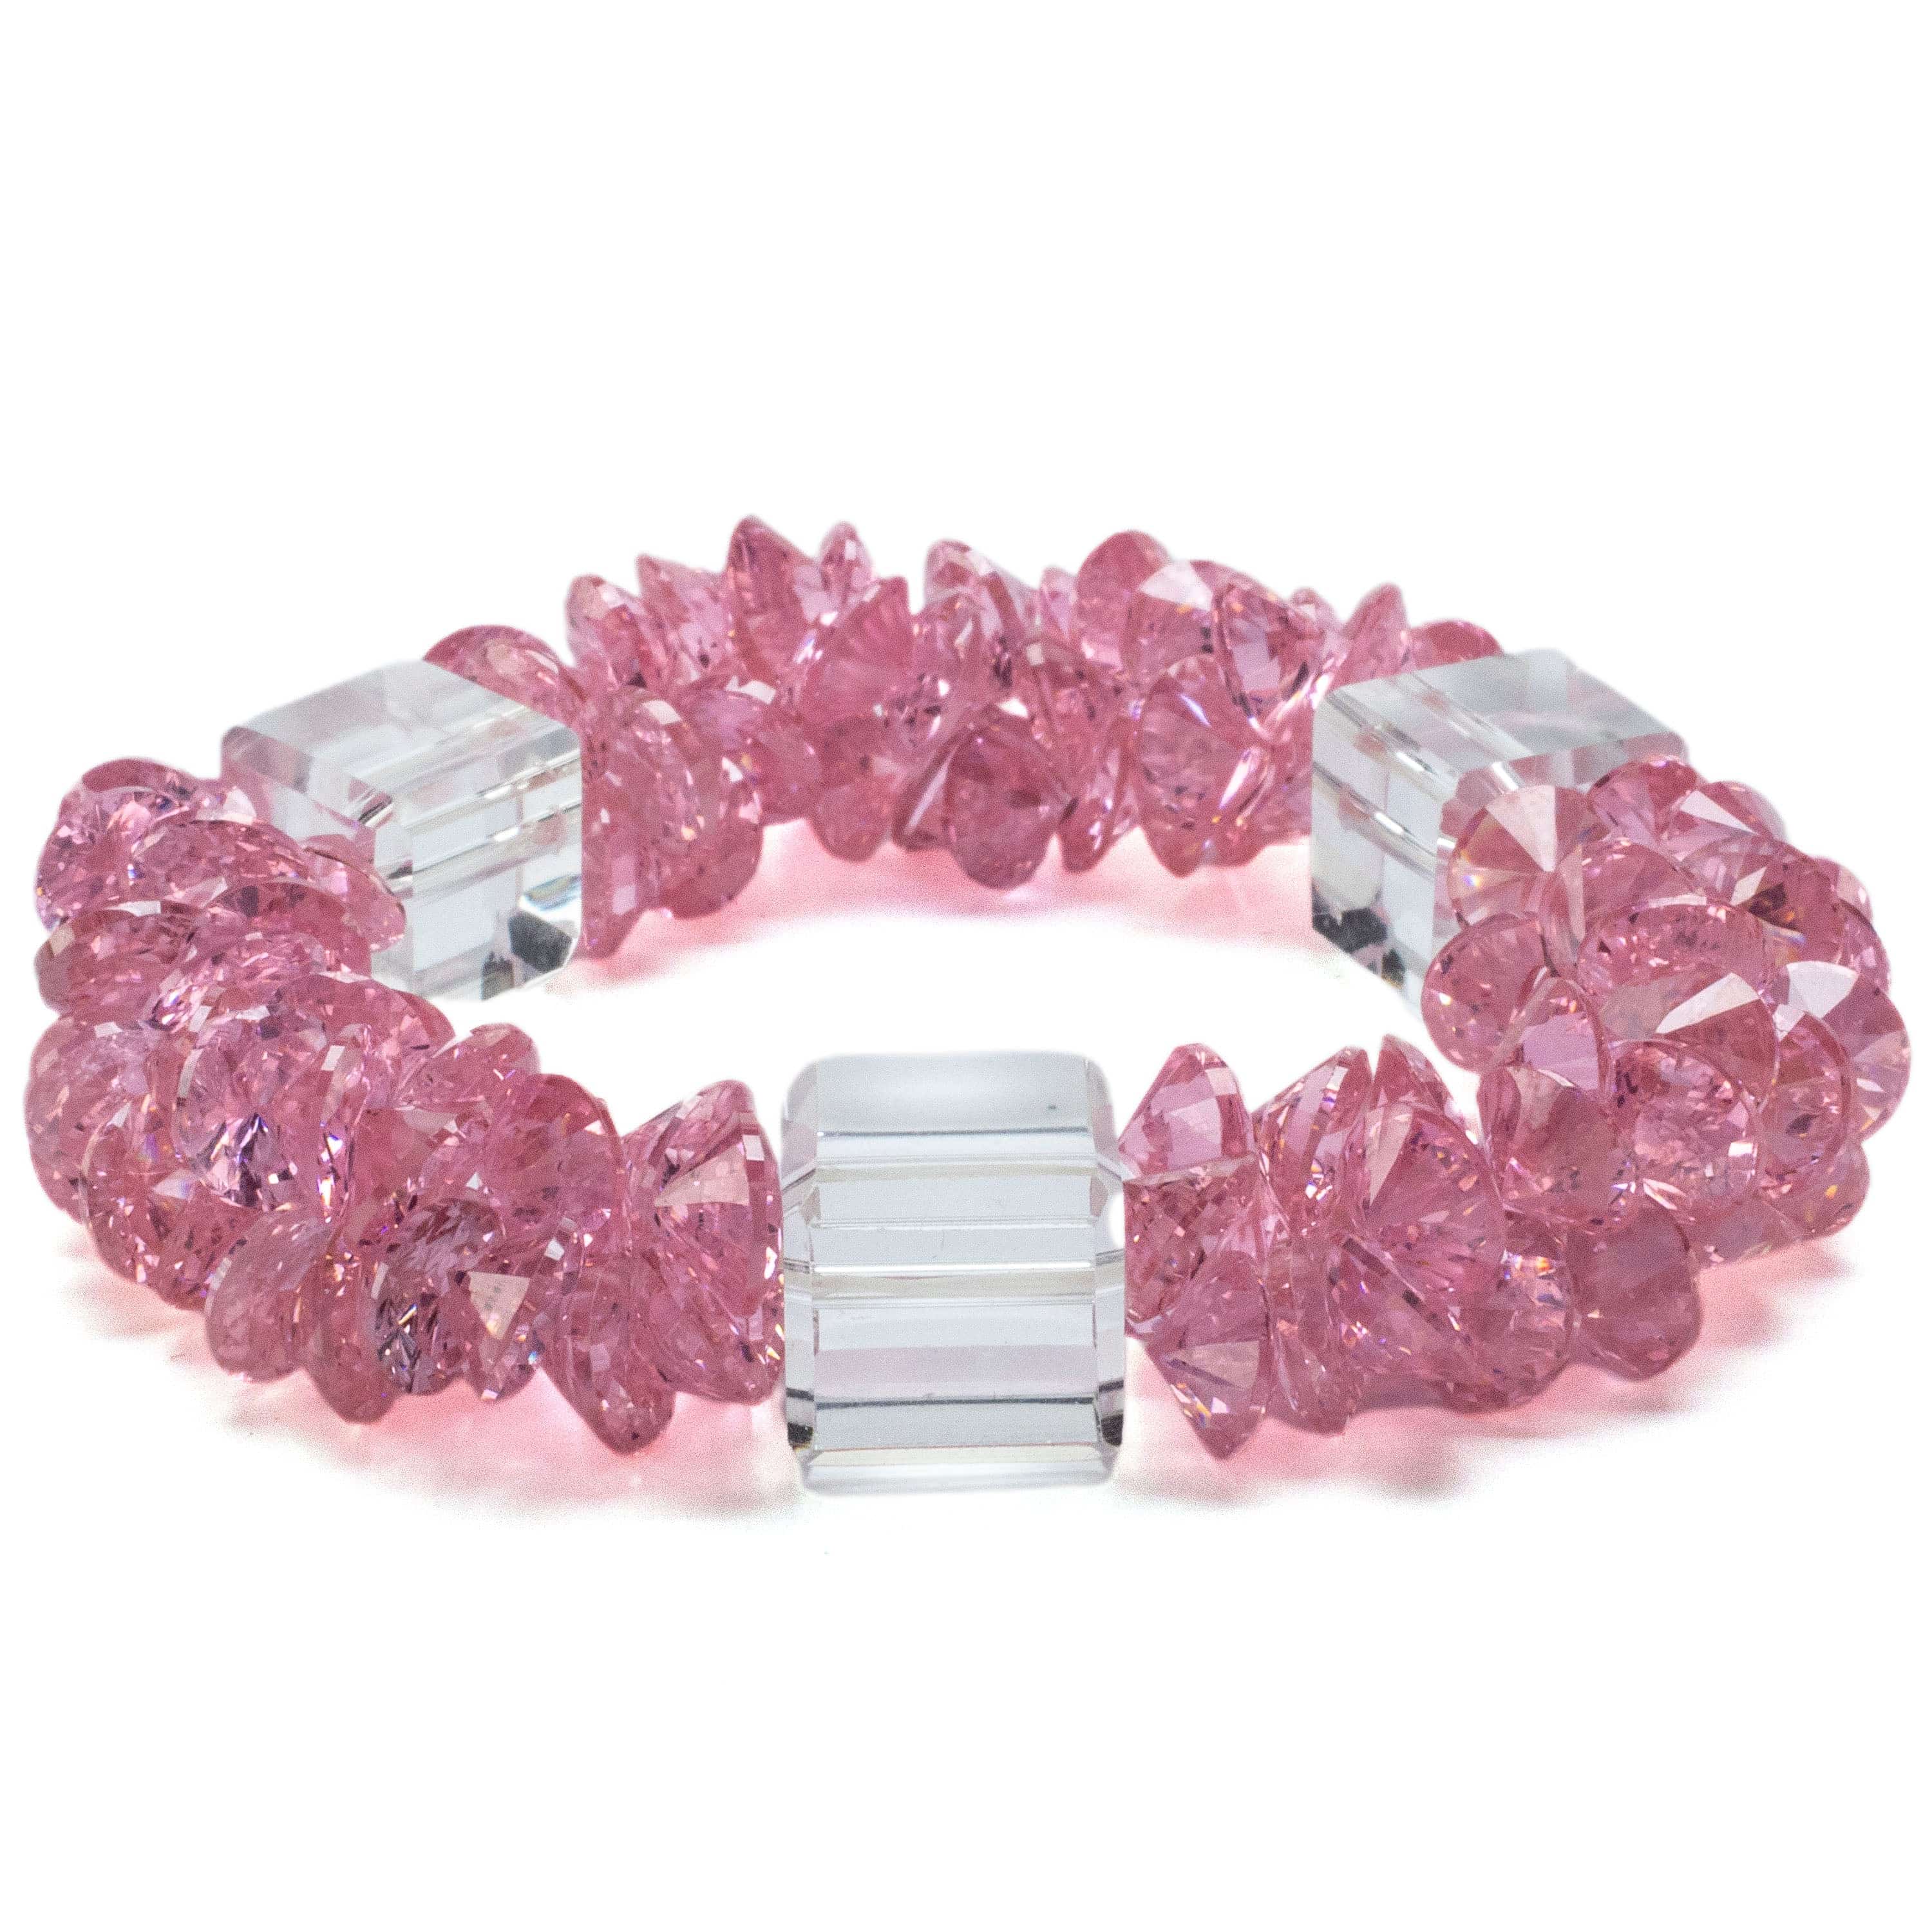 Kalifano Cubic Zirconia Bracelets Pink Cherry Blossom Faceted Cubic Zirconia Crystal Elastic Bracelet GOLD-BCZ-11